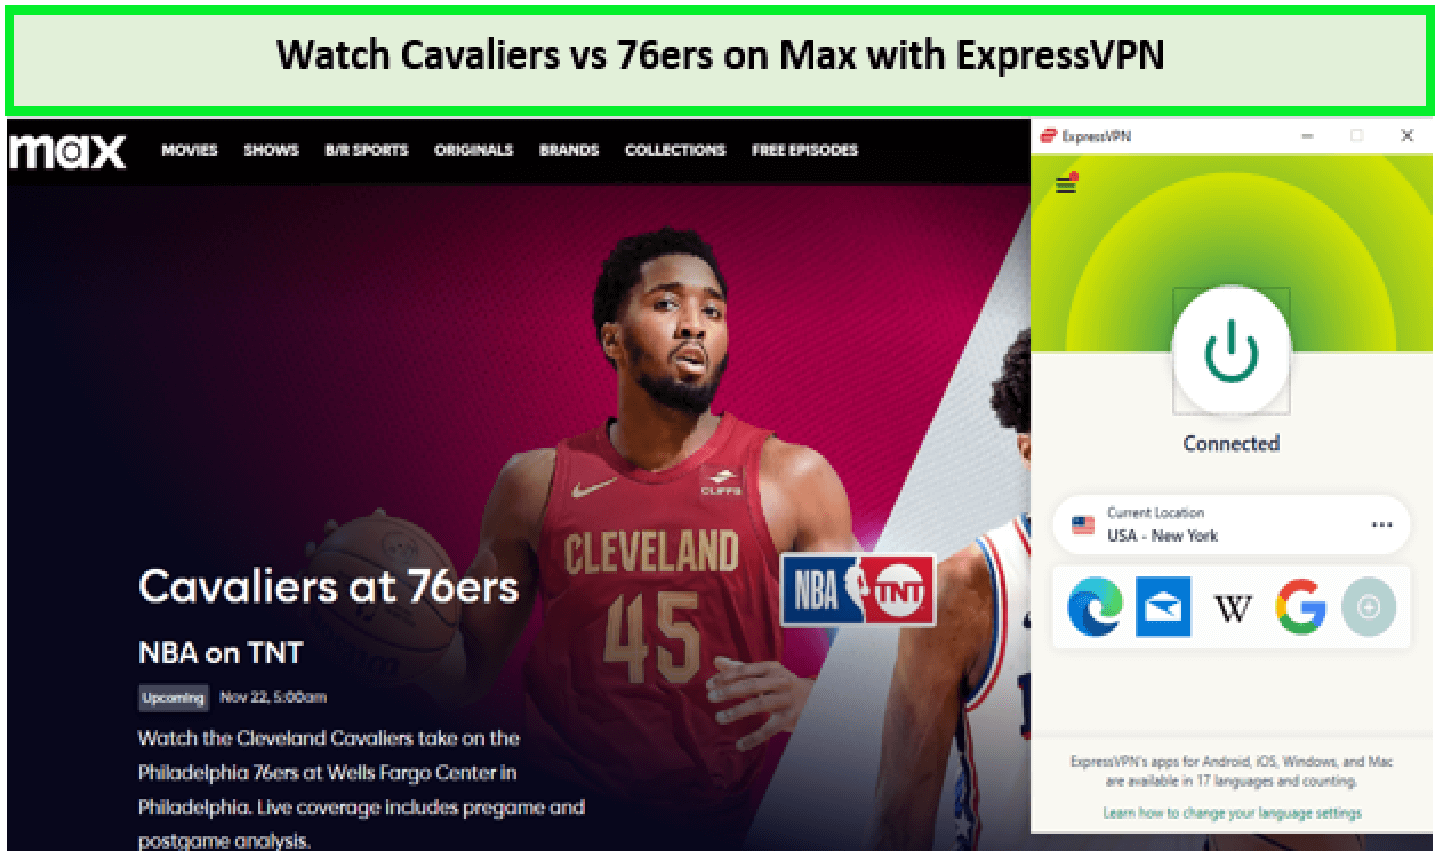 Watch-Cavaliers-vs-76ers-in-Canada-on-Max-with-ExpressVPN